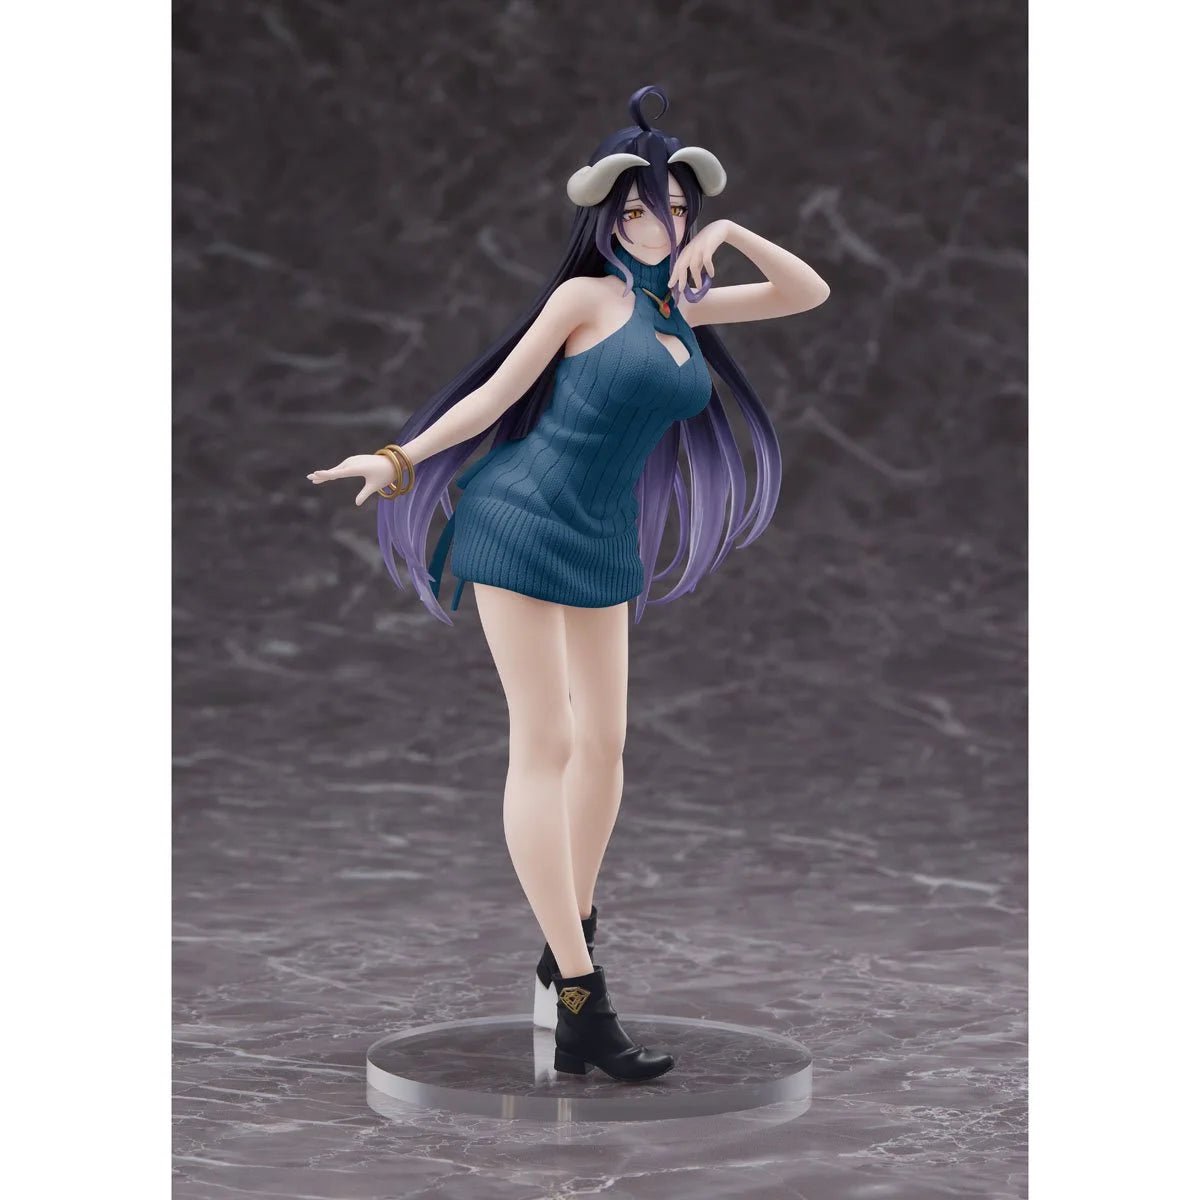 Taito - Coreful Albedo Knit Dress Version Renewal Edition Statue (Overlord IV) - Good Game Anime